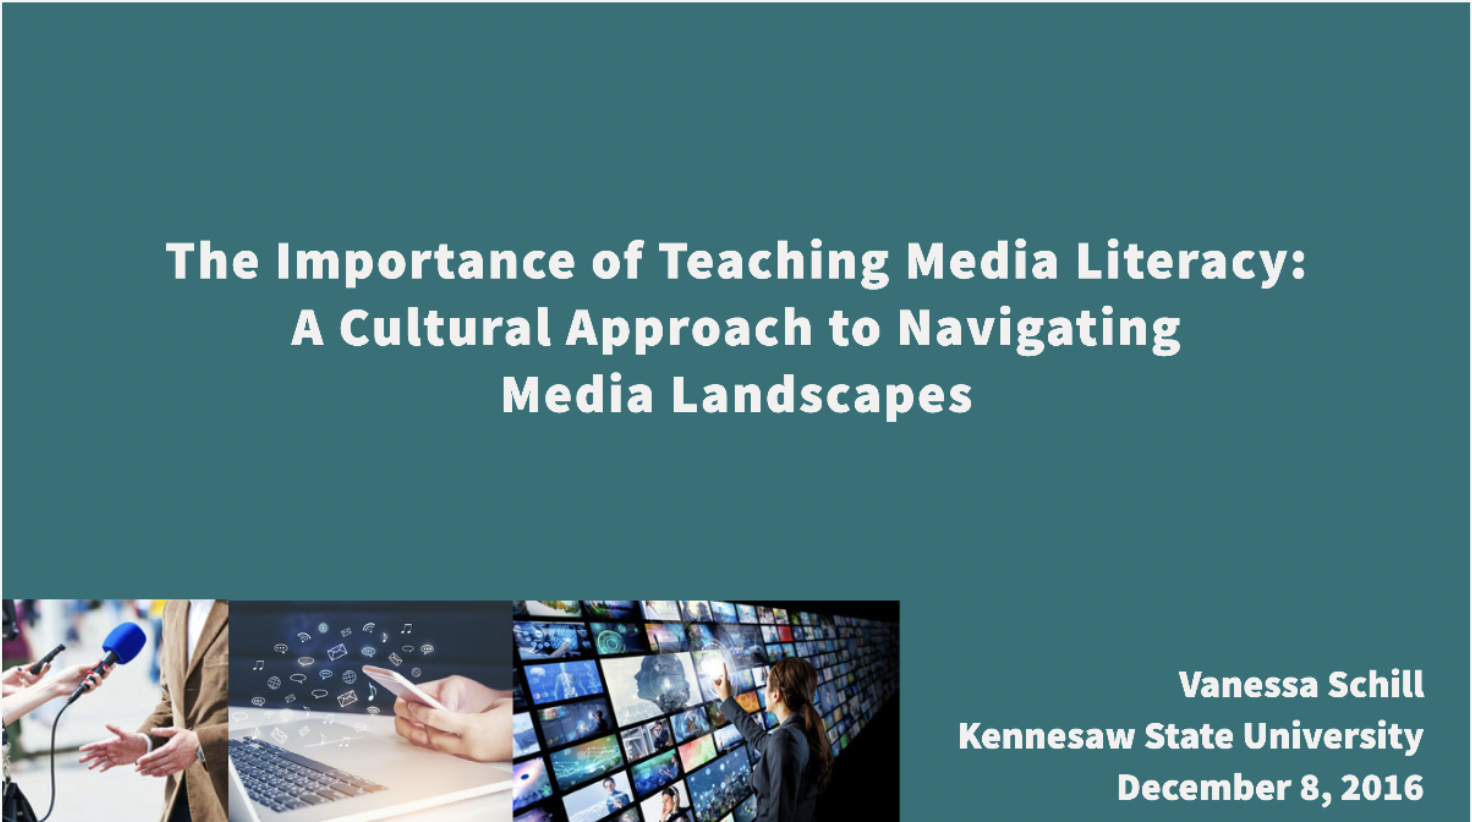 The Importance of Media Literacy